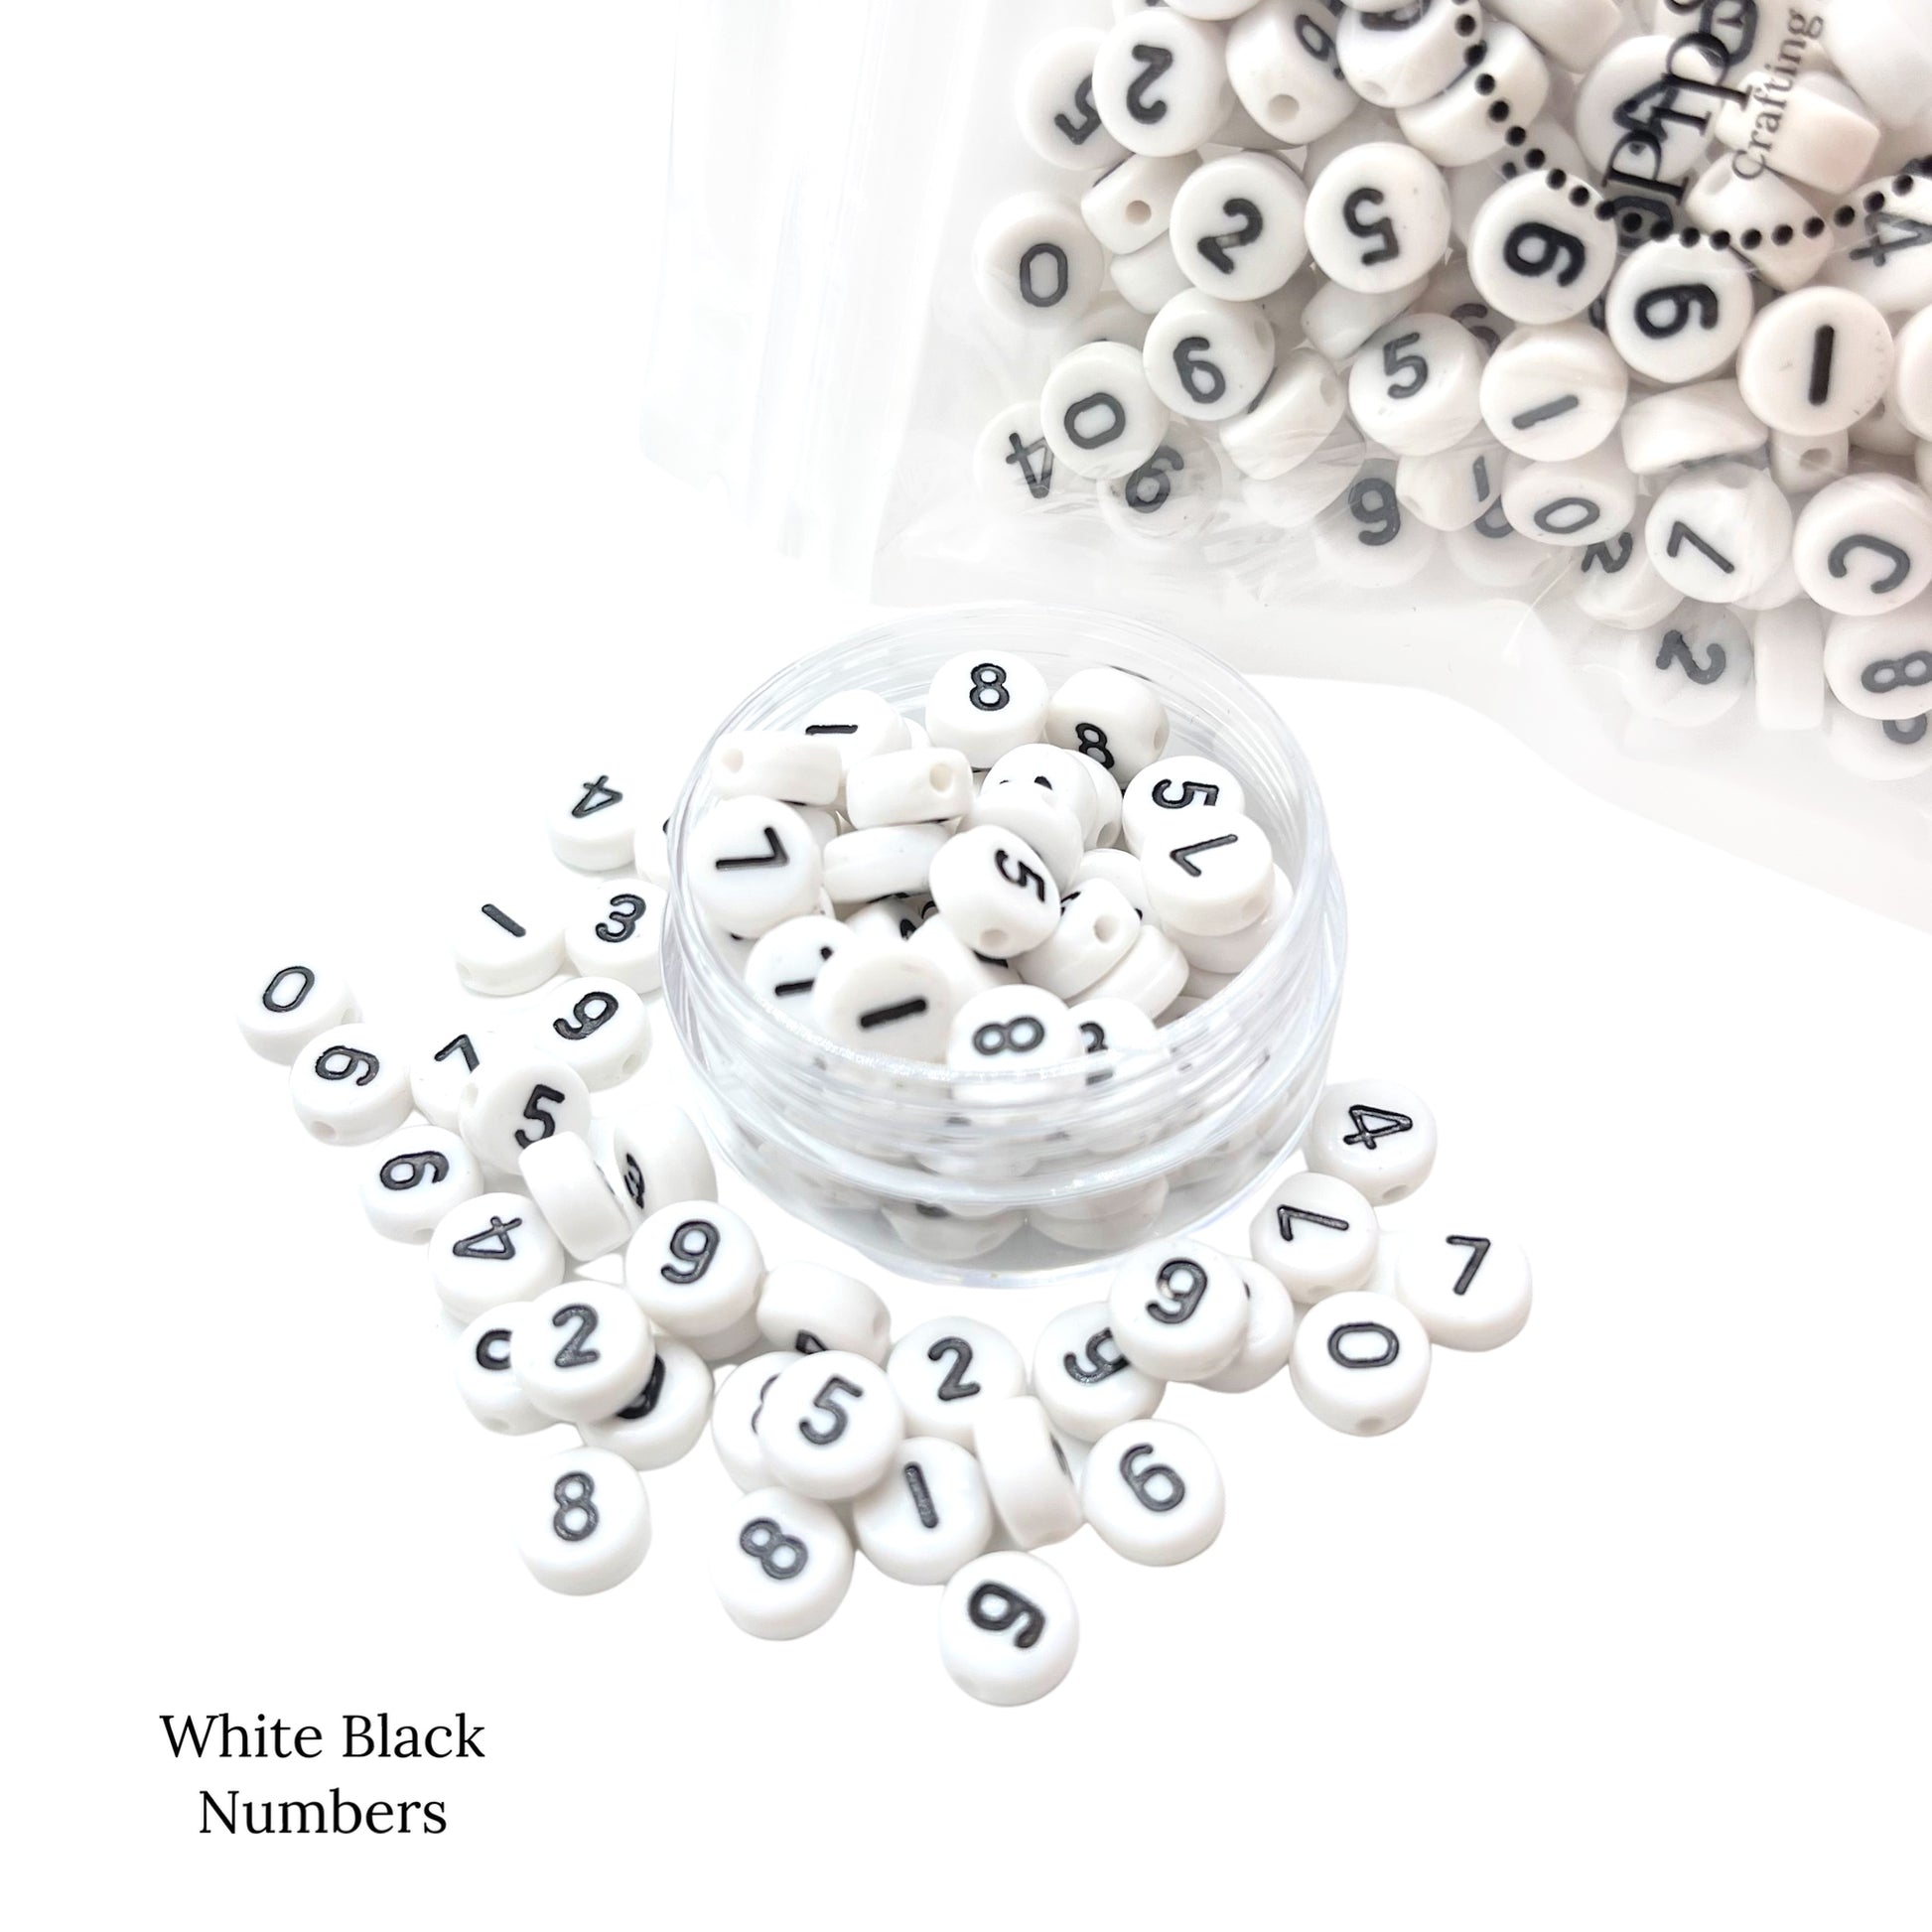 7mm Number Beads, 7mm Black and White Beads, Round Letter Beads, Numbers